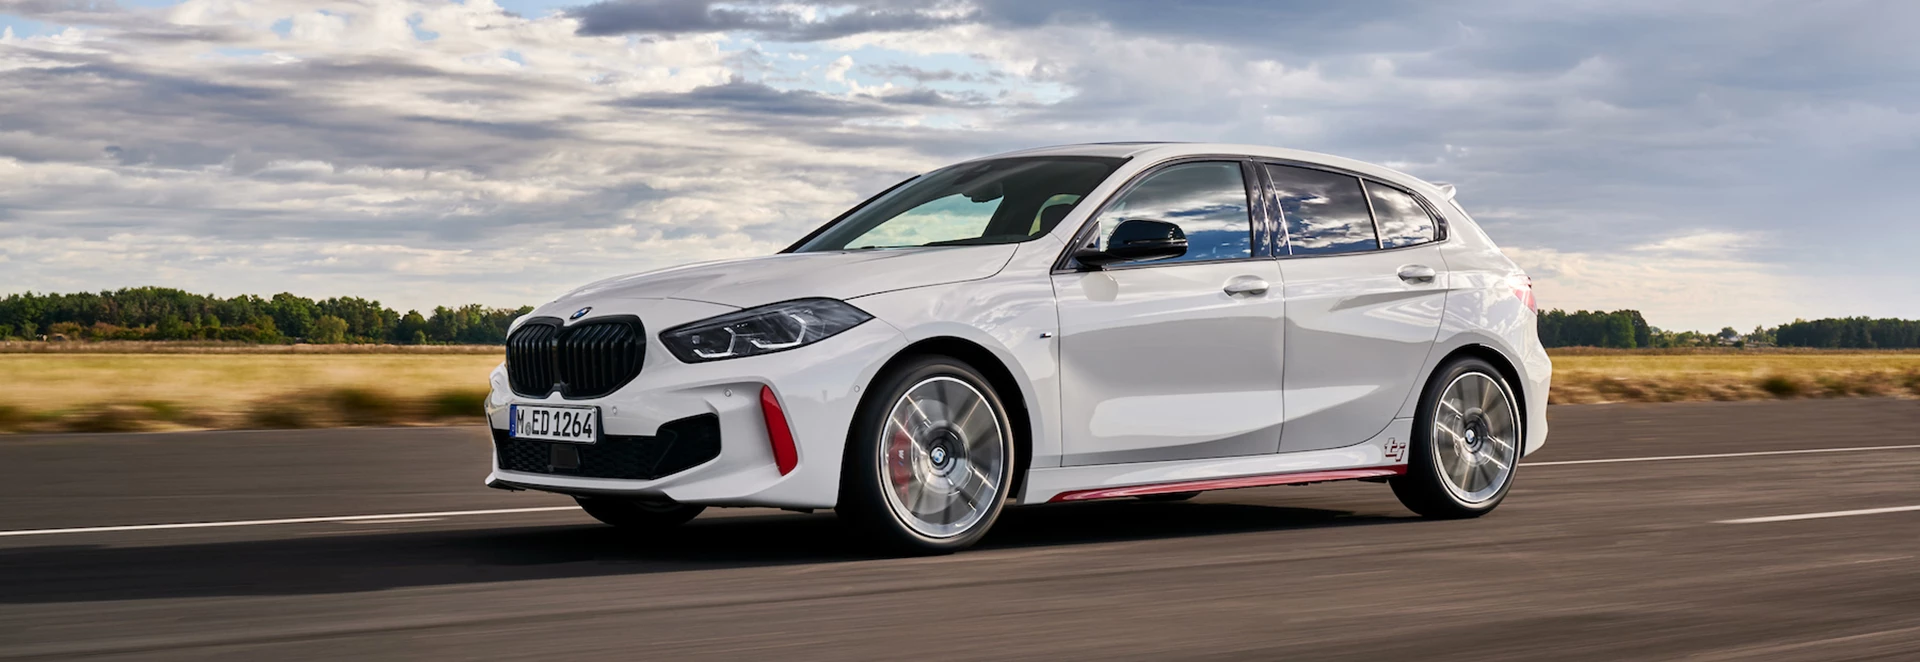 5 things you need to know about the new BMW 128ti hot hatch 